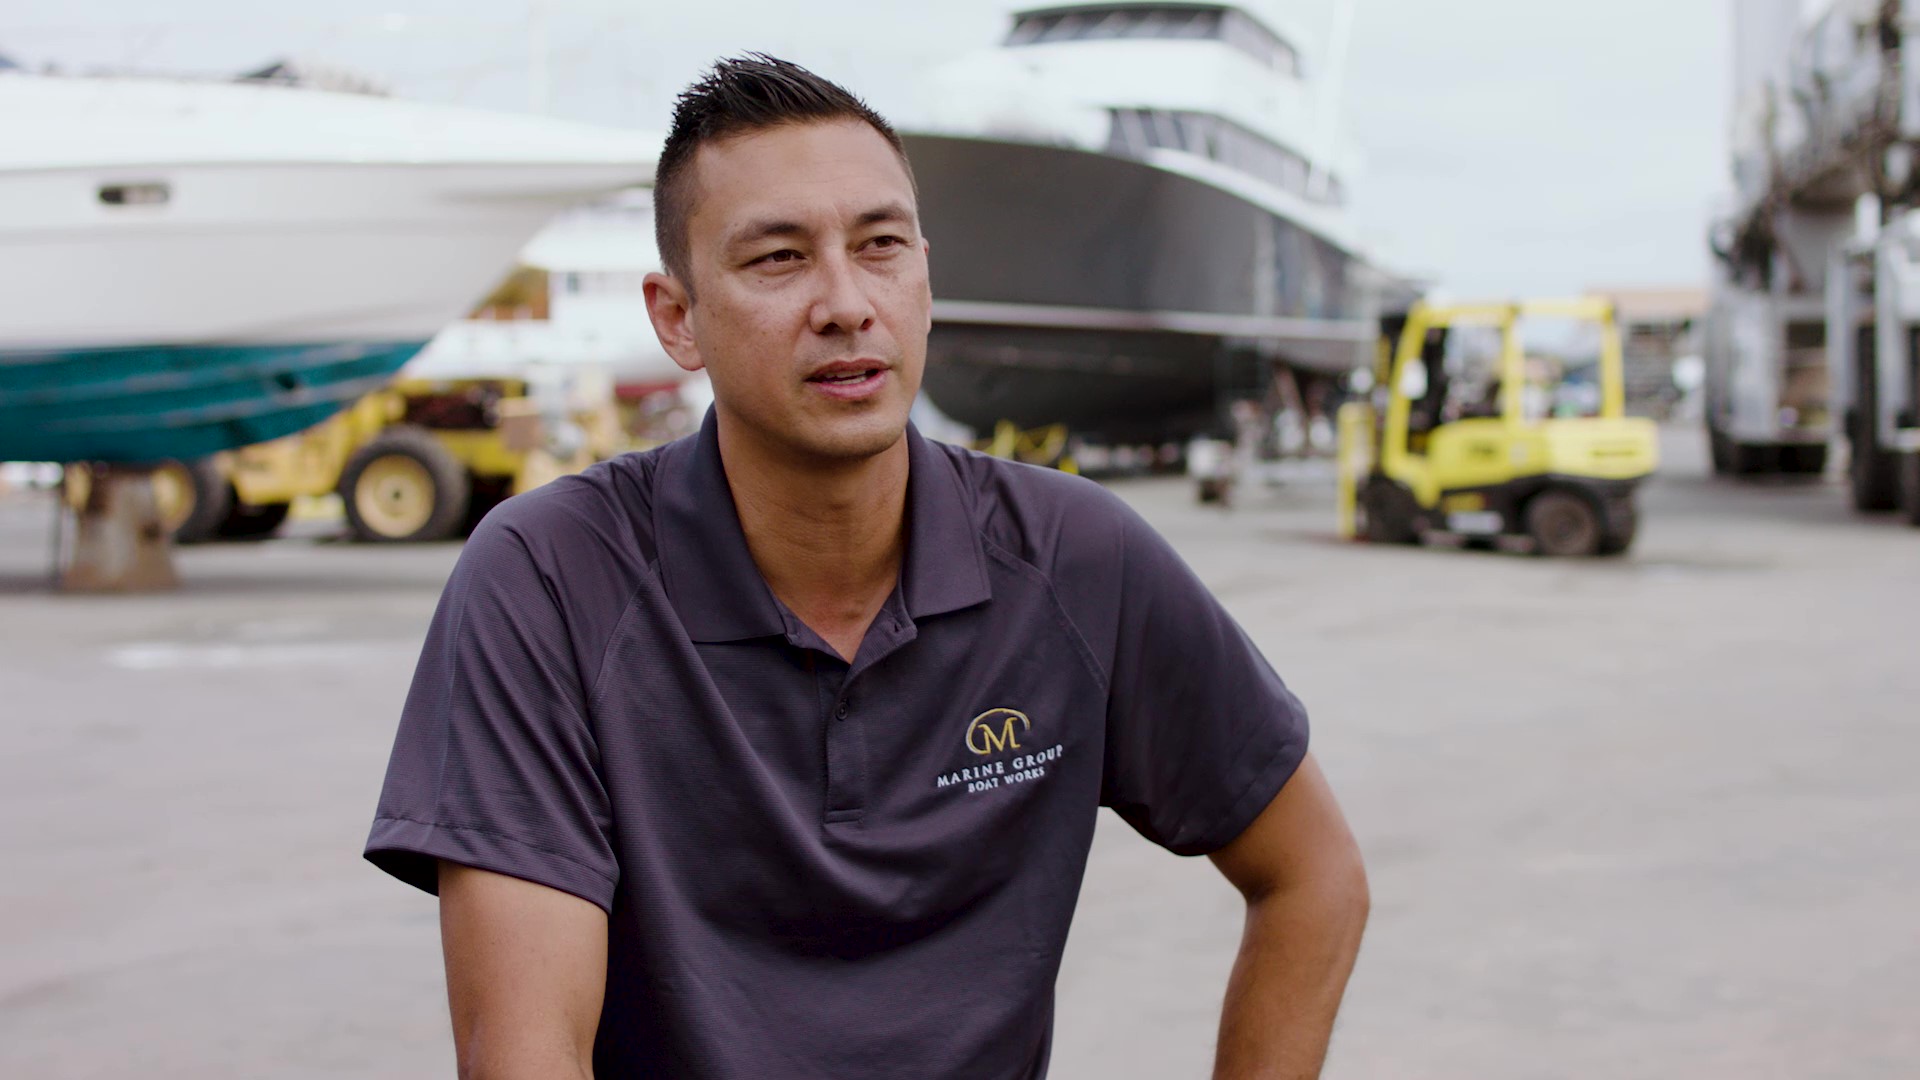 Still captured from the Work the Waterfront video featuring MGBW employee, Paul Snay.